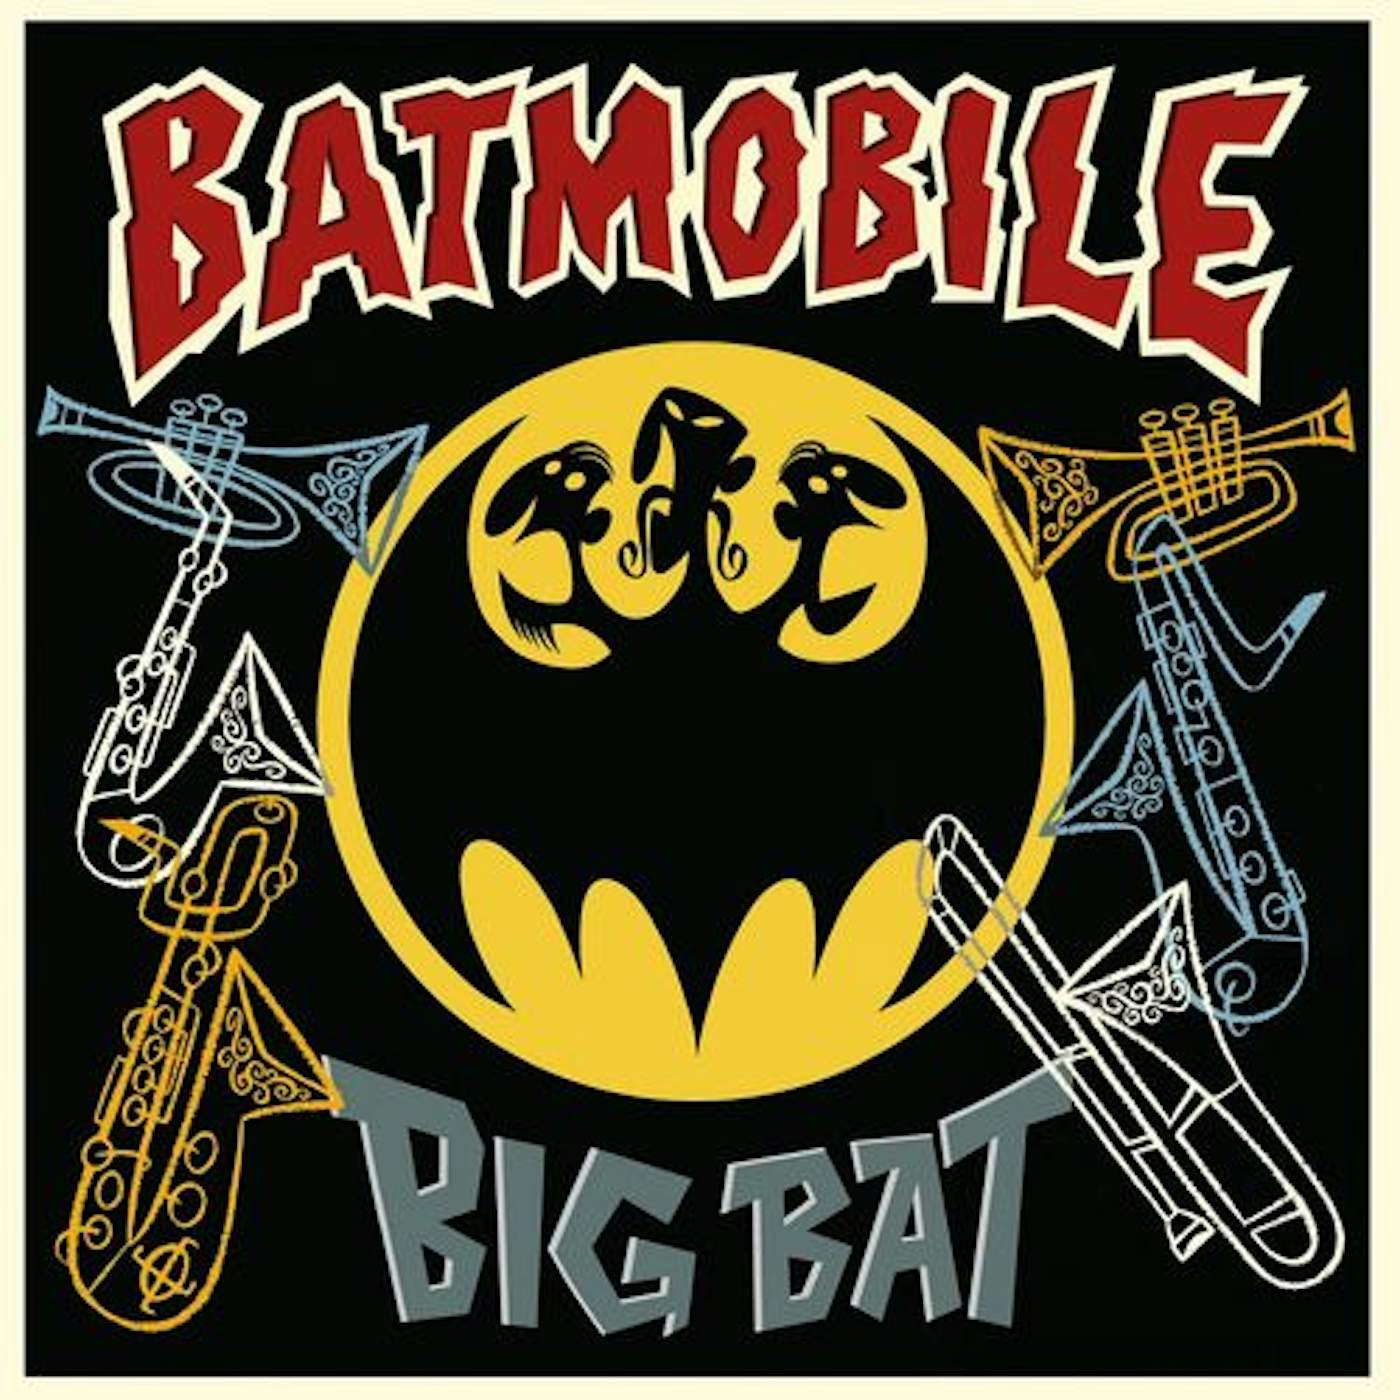 Batmobile BIG BAT: THEIR CLASSIC HITS WITH HORNS ADDED! Vinyl Record